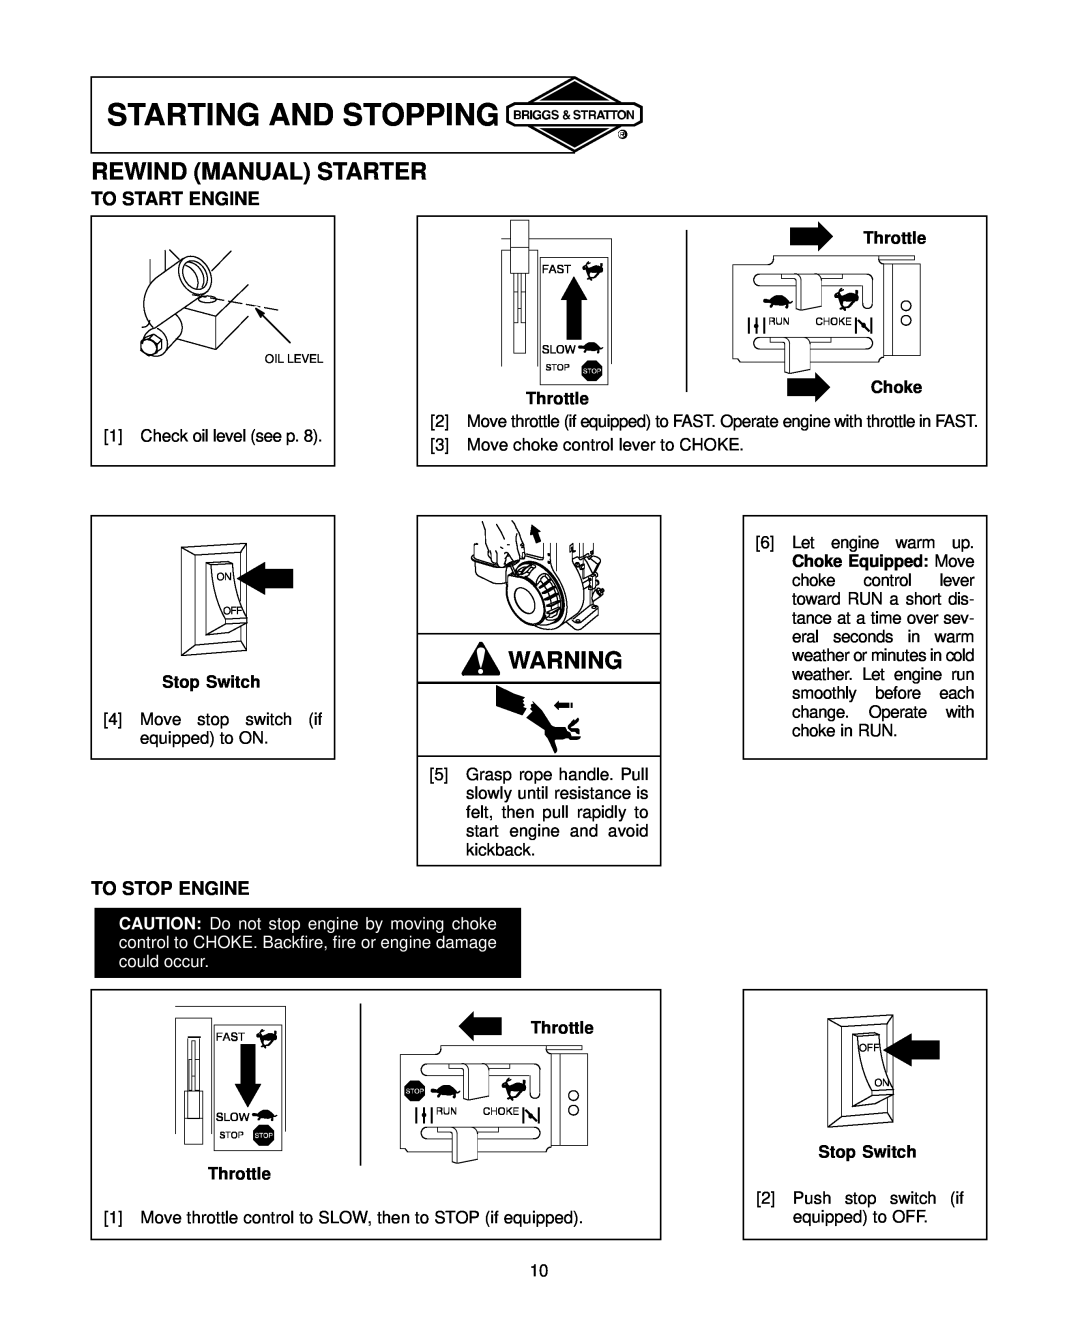 Briggs & Stratton 91200, 92200, 94200 Starting And Stopping, Rewind Manual Starter, To Start Engine, To Stop Engine, Choke 